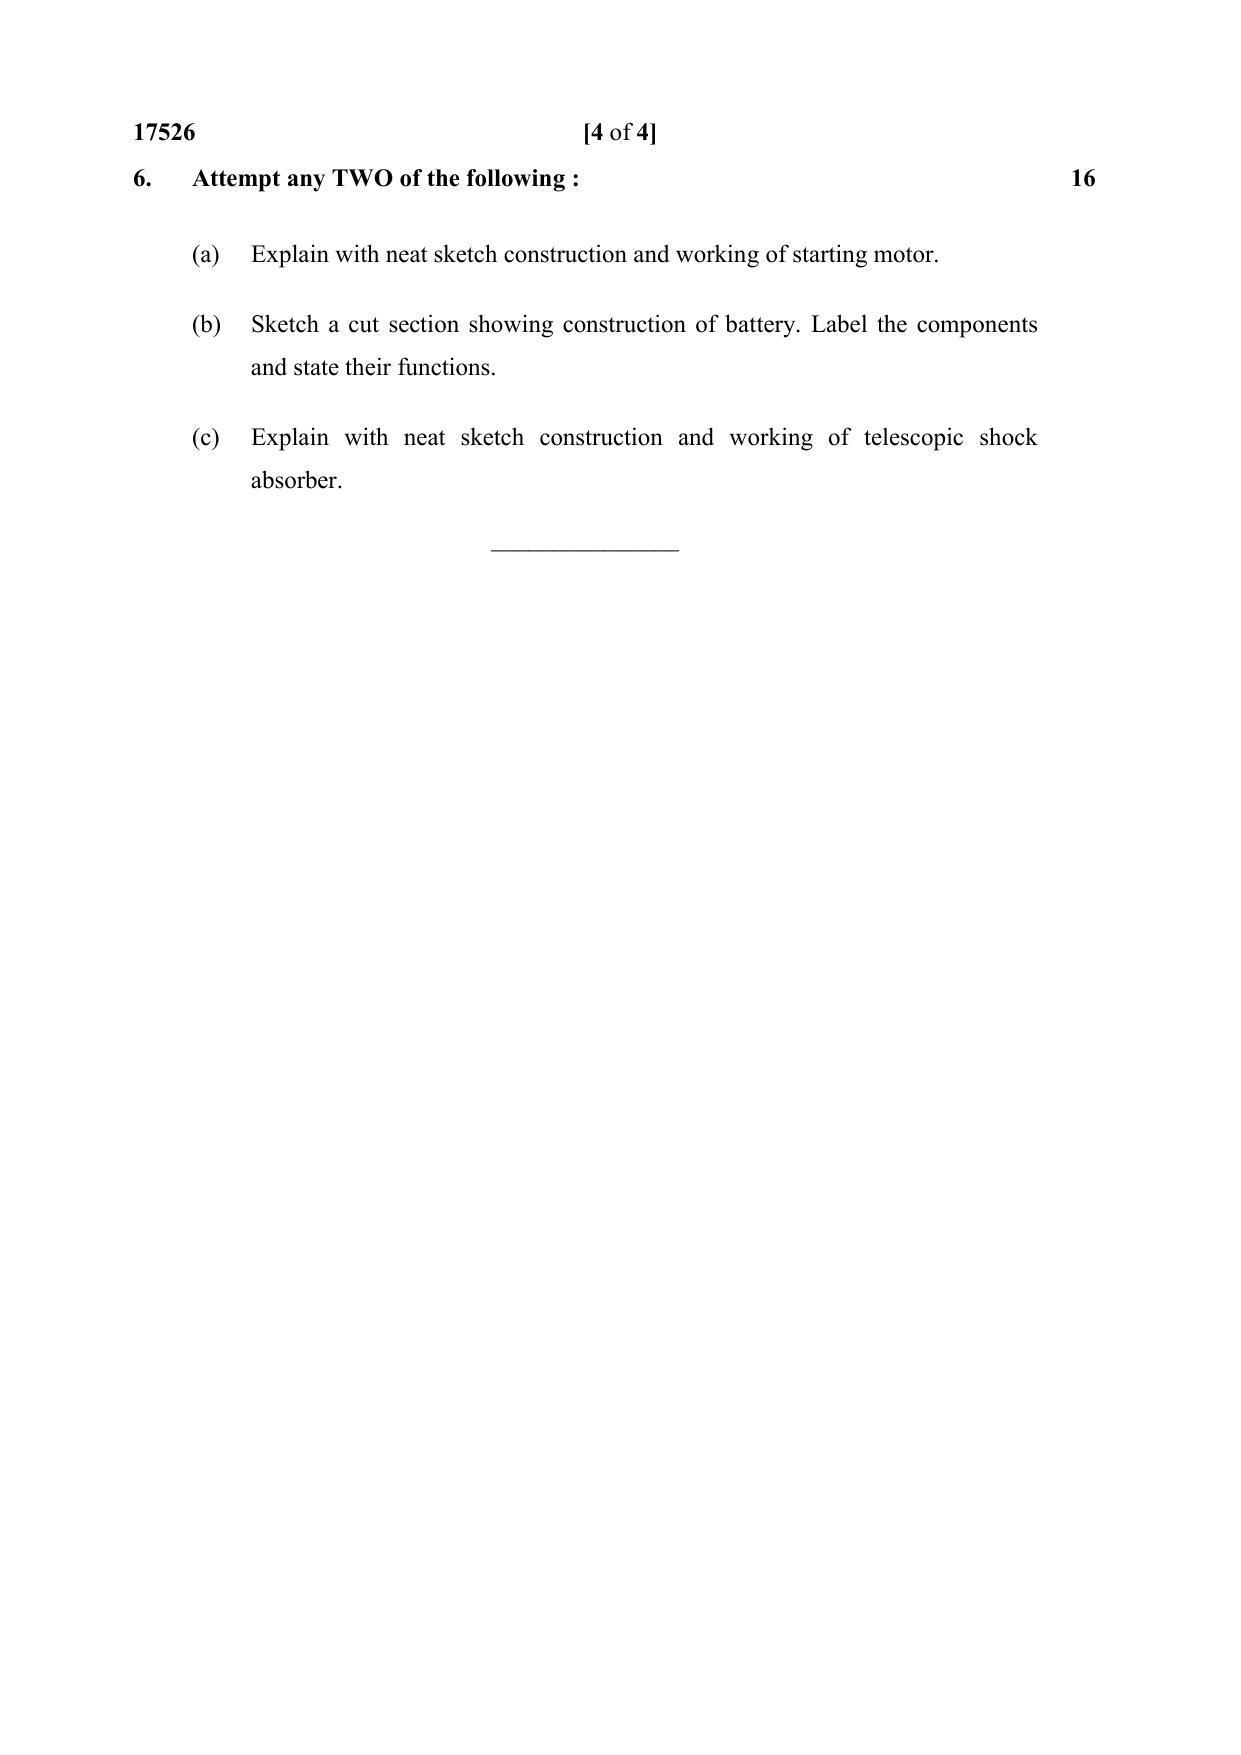 MSBTE Winter Question Paper 2019 - Advanced Manufacturing Processes - Page 4